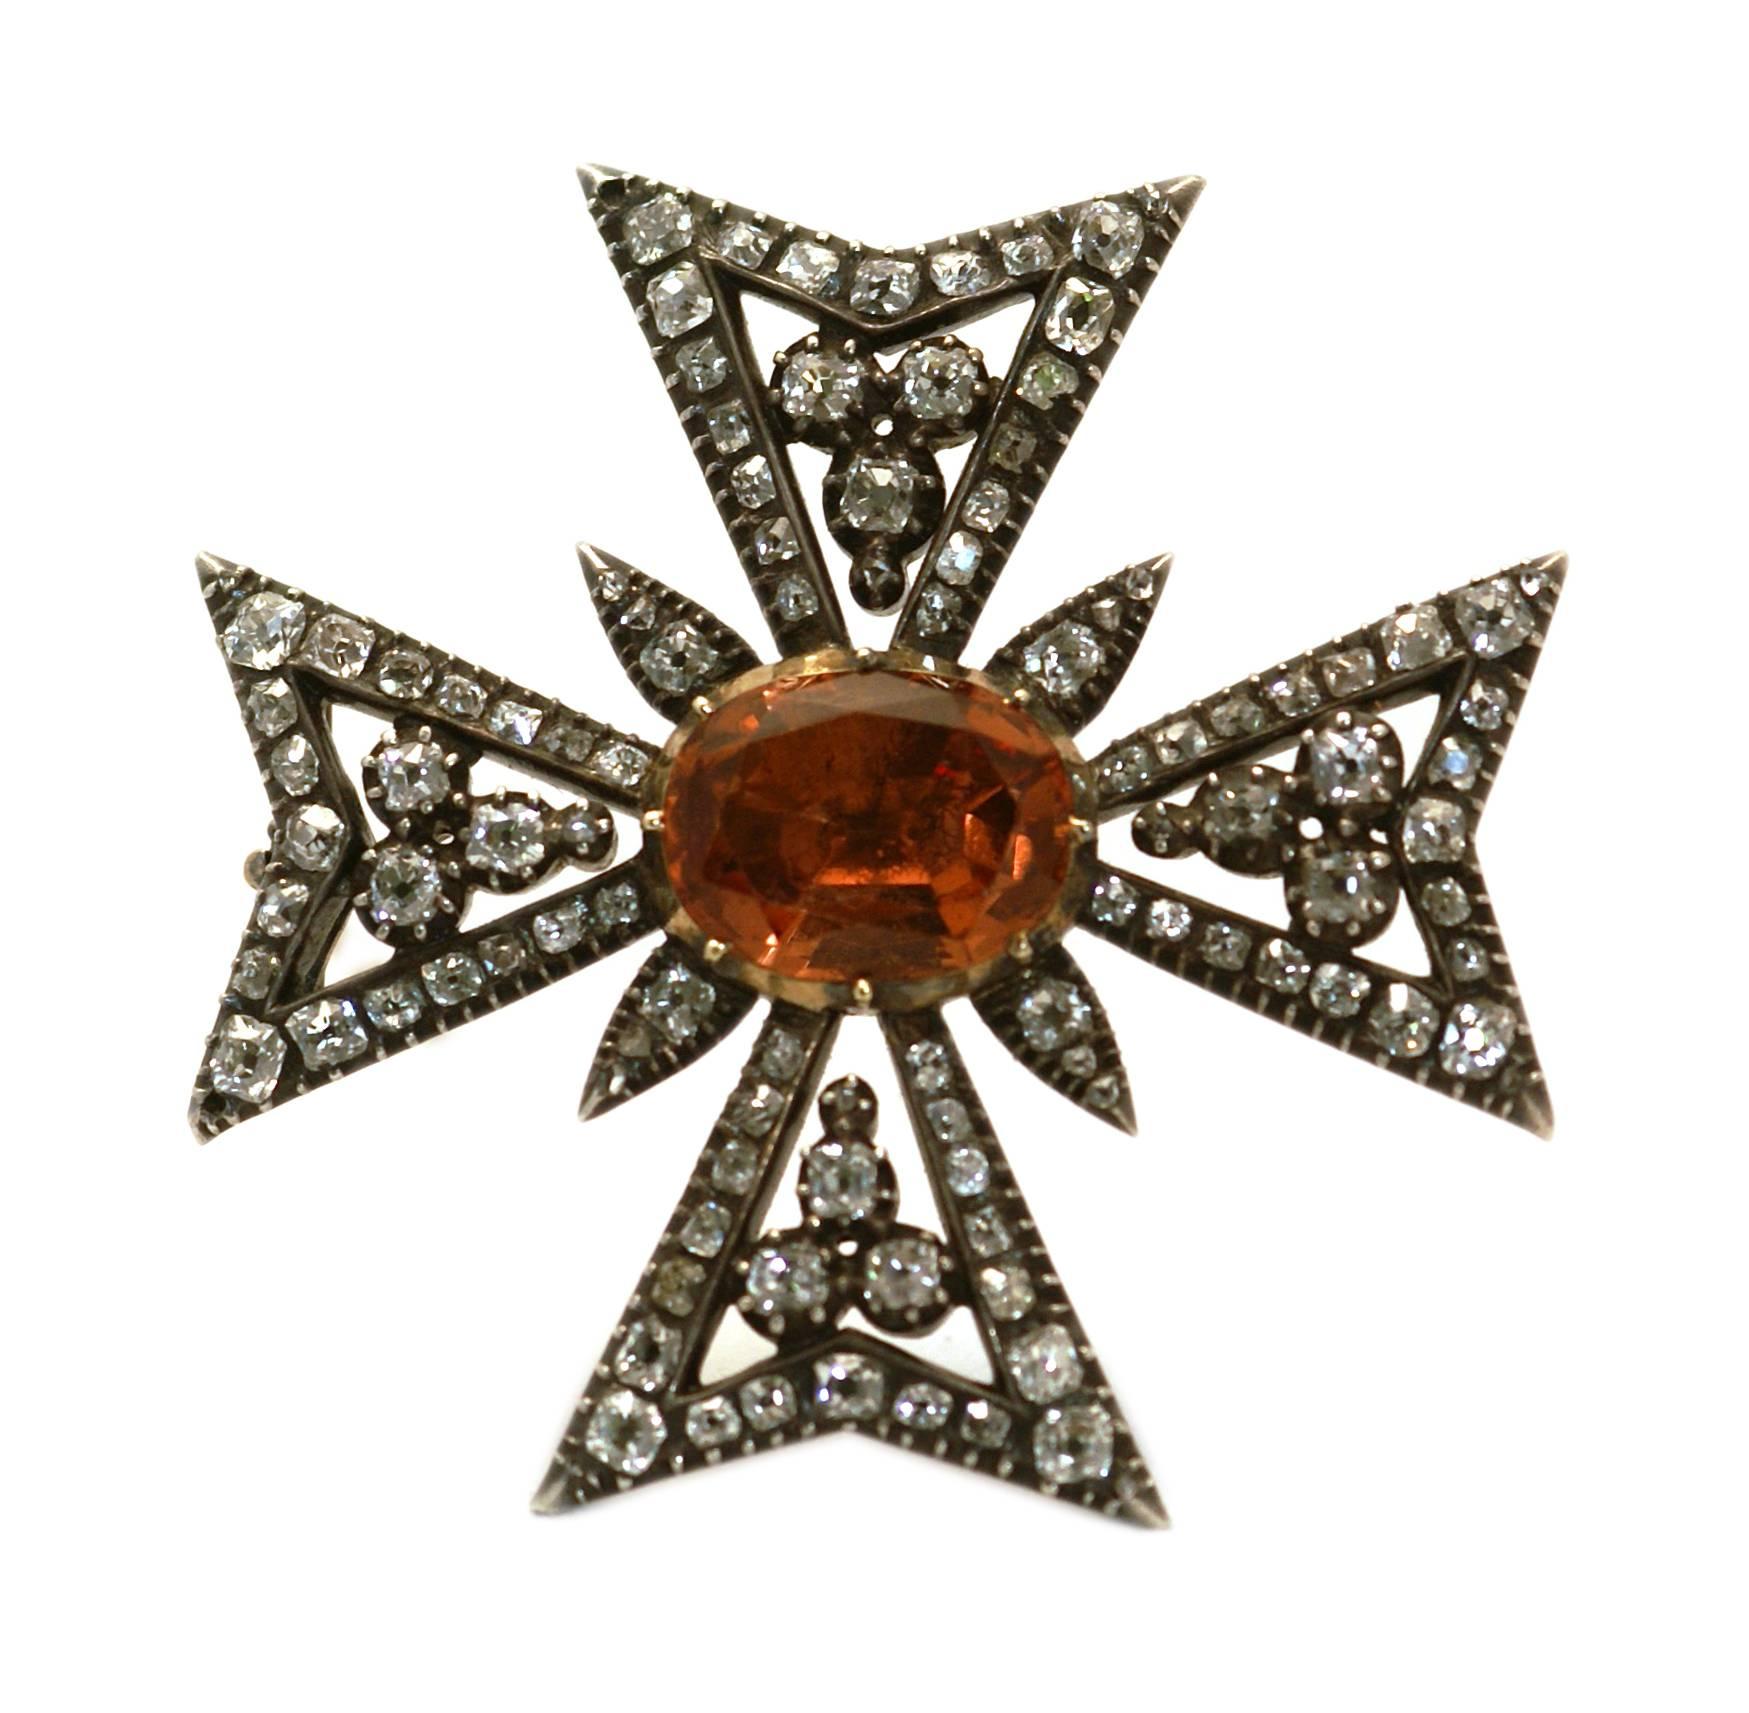 An exquisitely crafted antique Maltese Cross brooch, centering a fine Imperial Topaz, highlighted by old cut diamonds. Mounted in silver and gold. Circa 1880